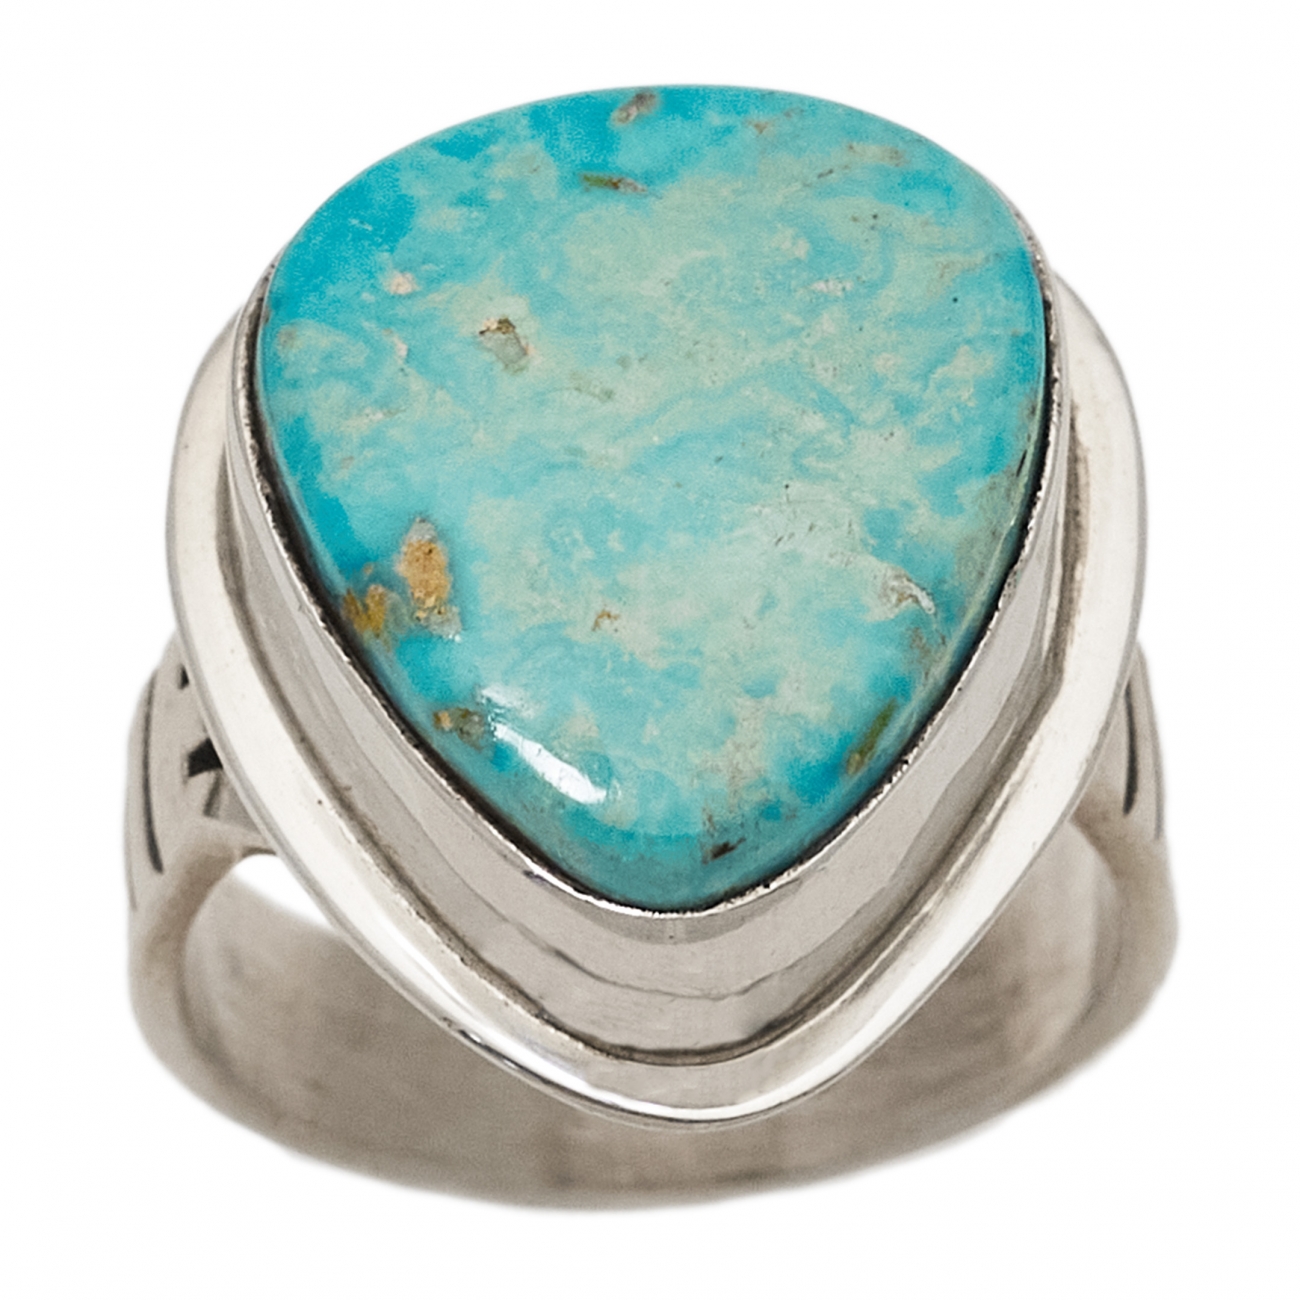 Harpo Paris ring BA1293, Navajo, in turquoise and silver